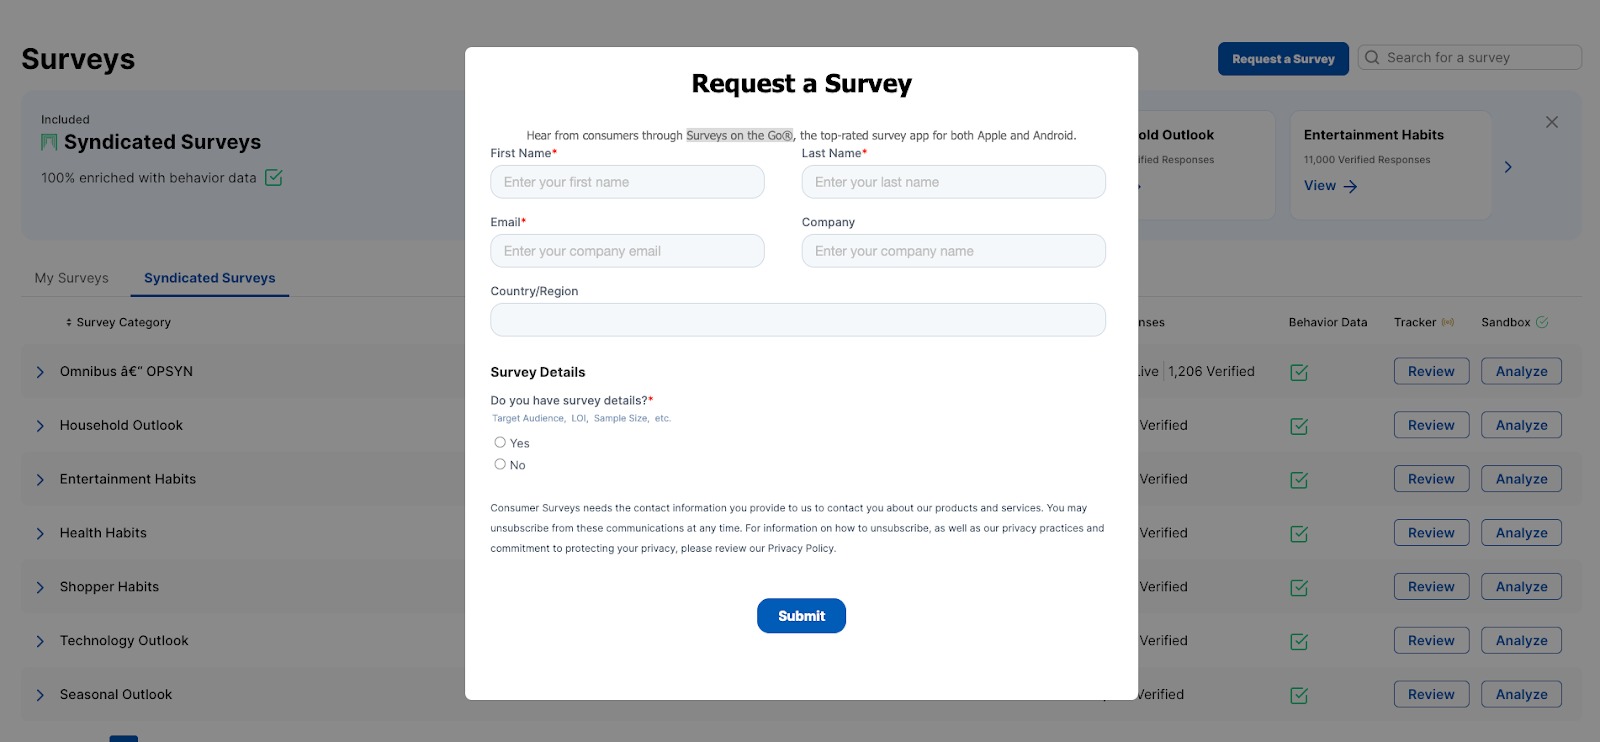 Example of request survey form in the Consumer Surveys app by Semrush.